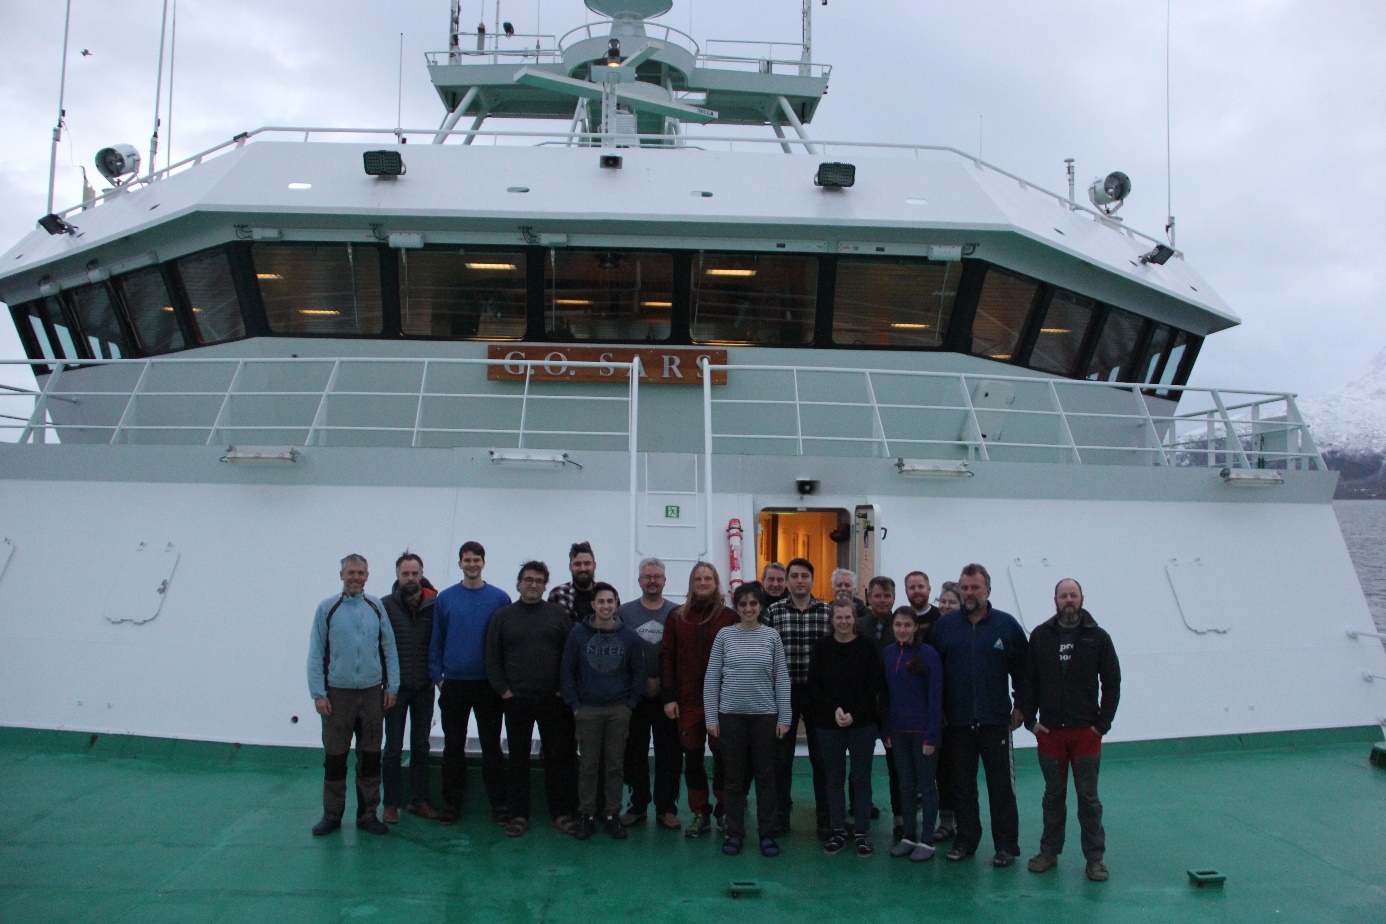 Group photo of crew on deck